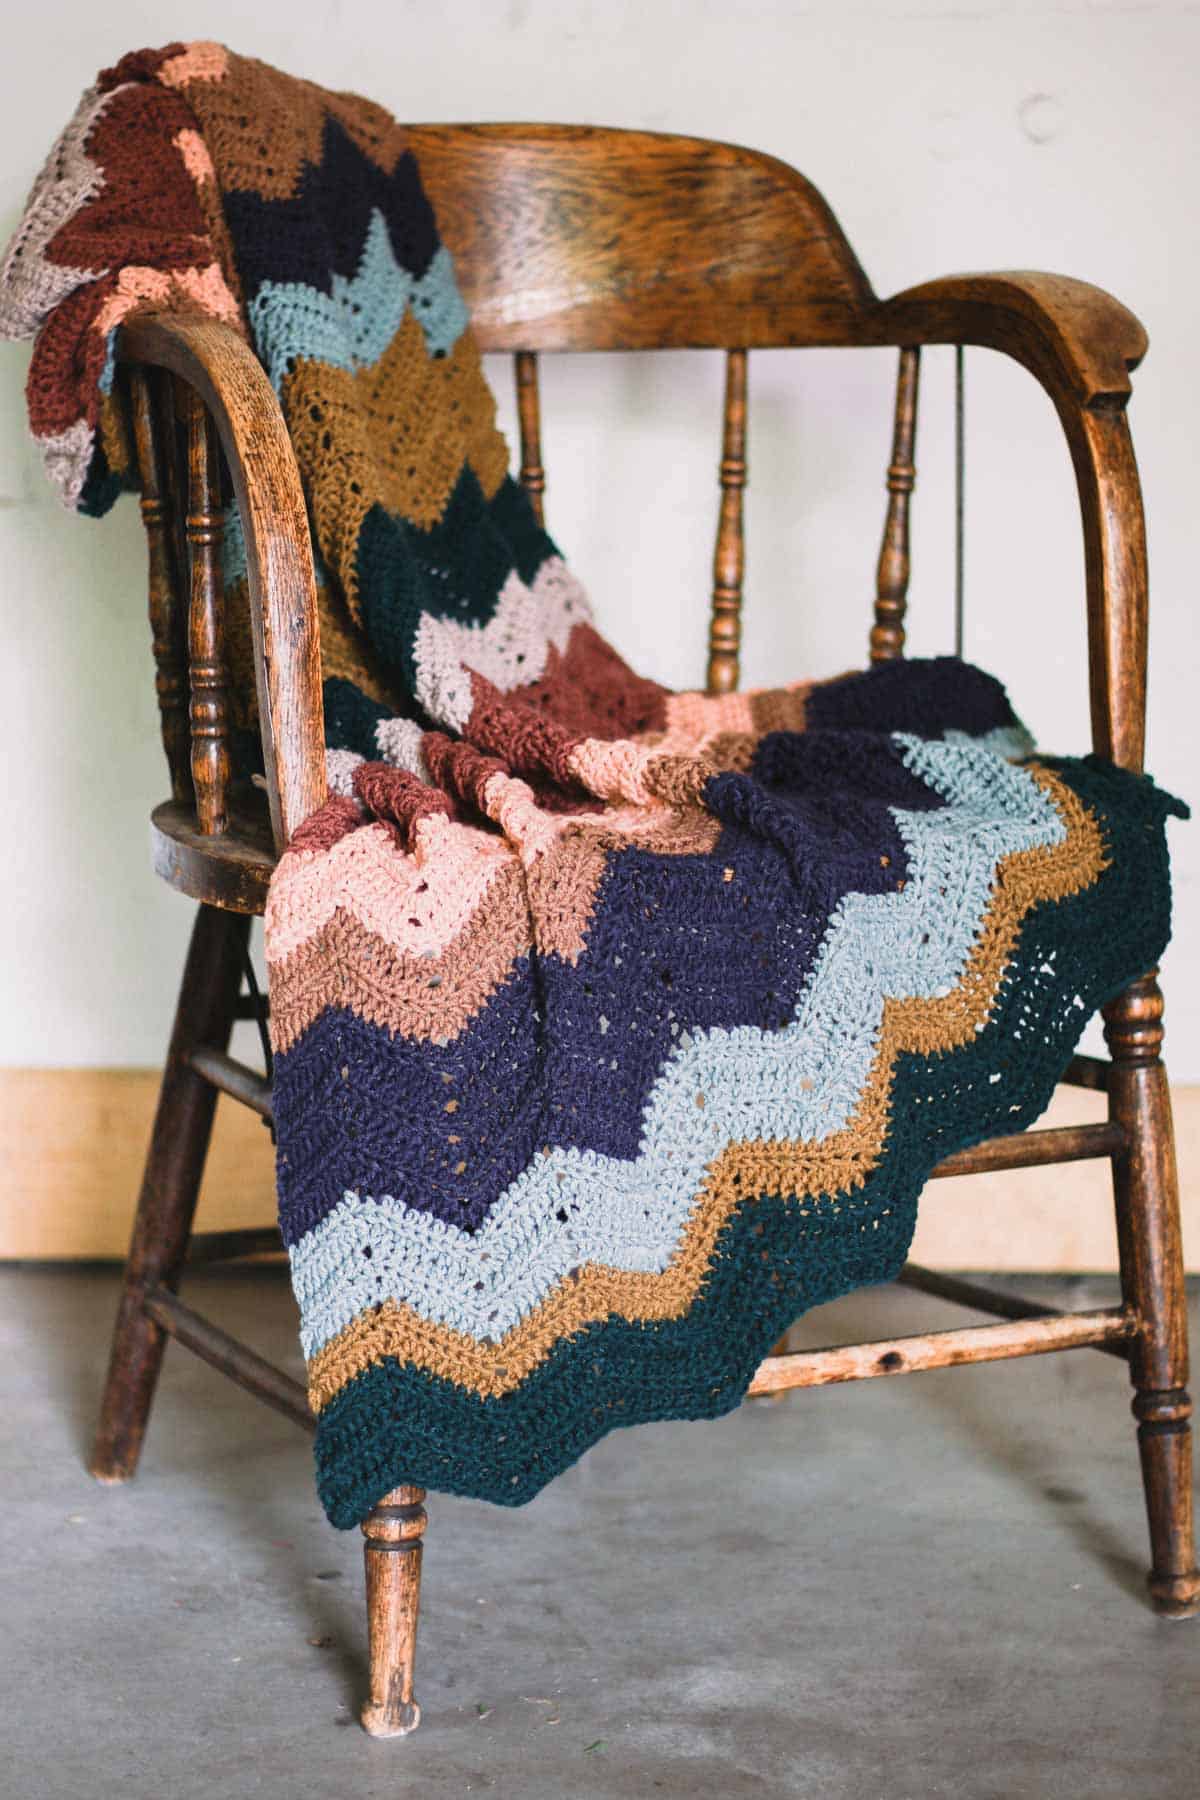 A crochet chevron blanket with zig zag stripes draped over a rustic wood chair.